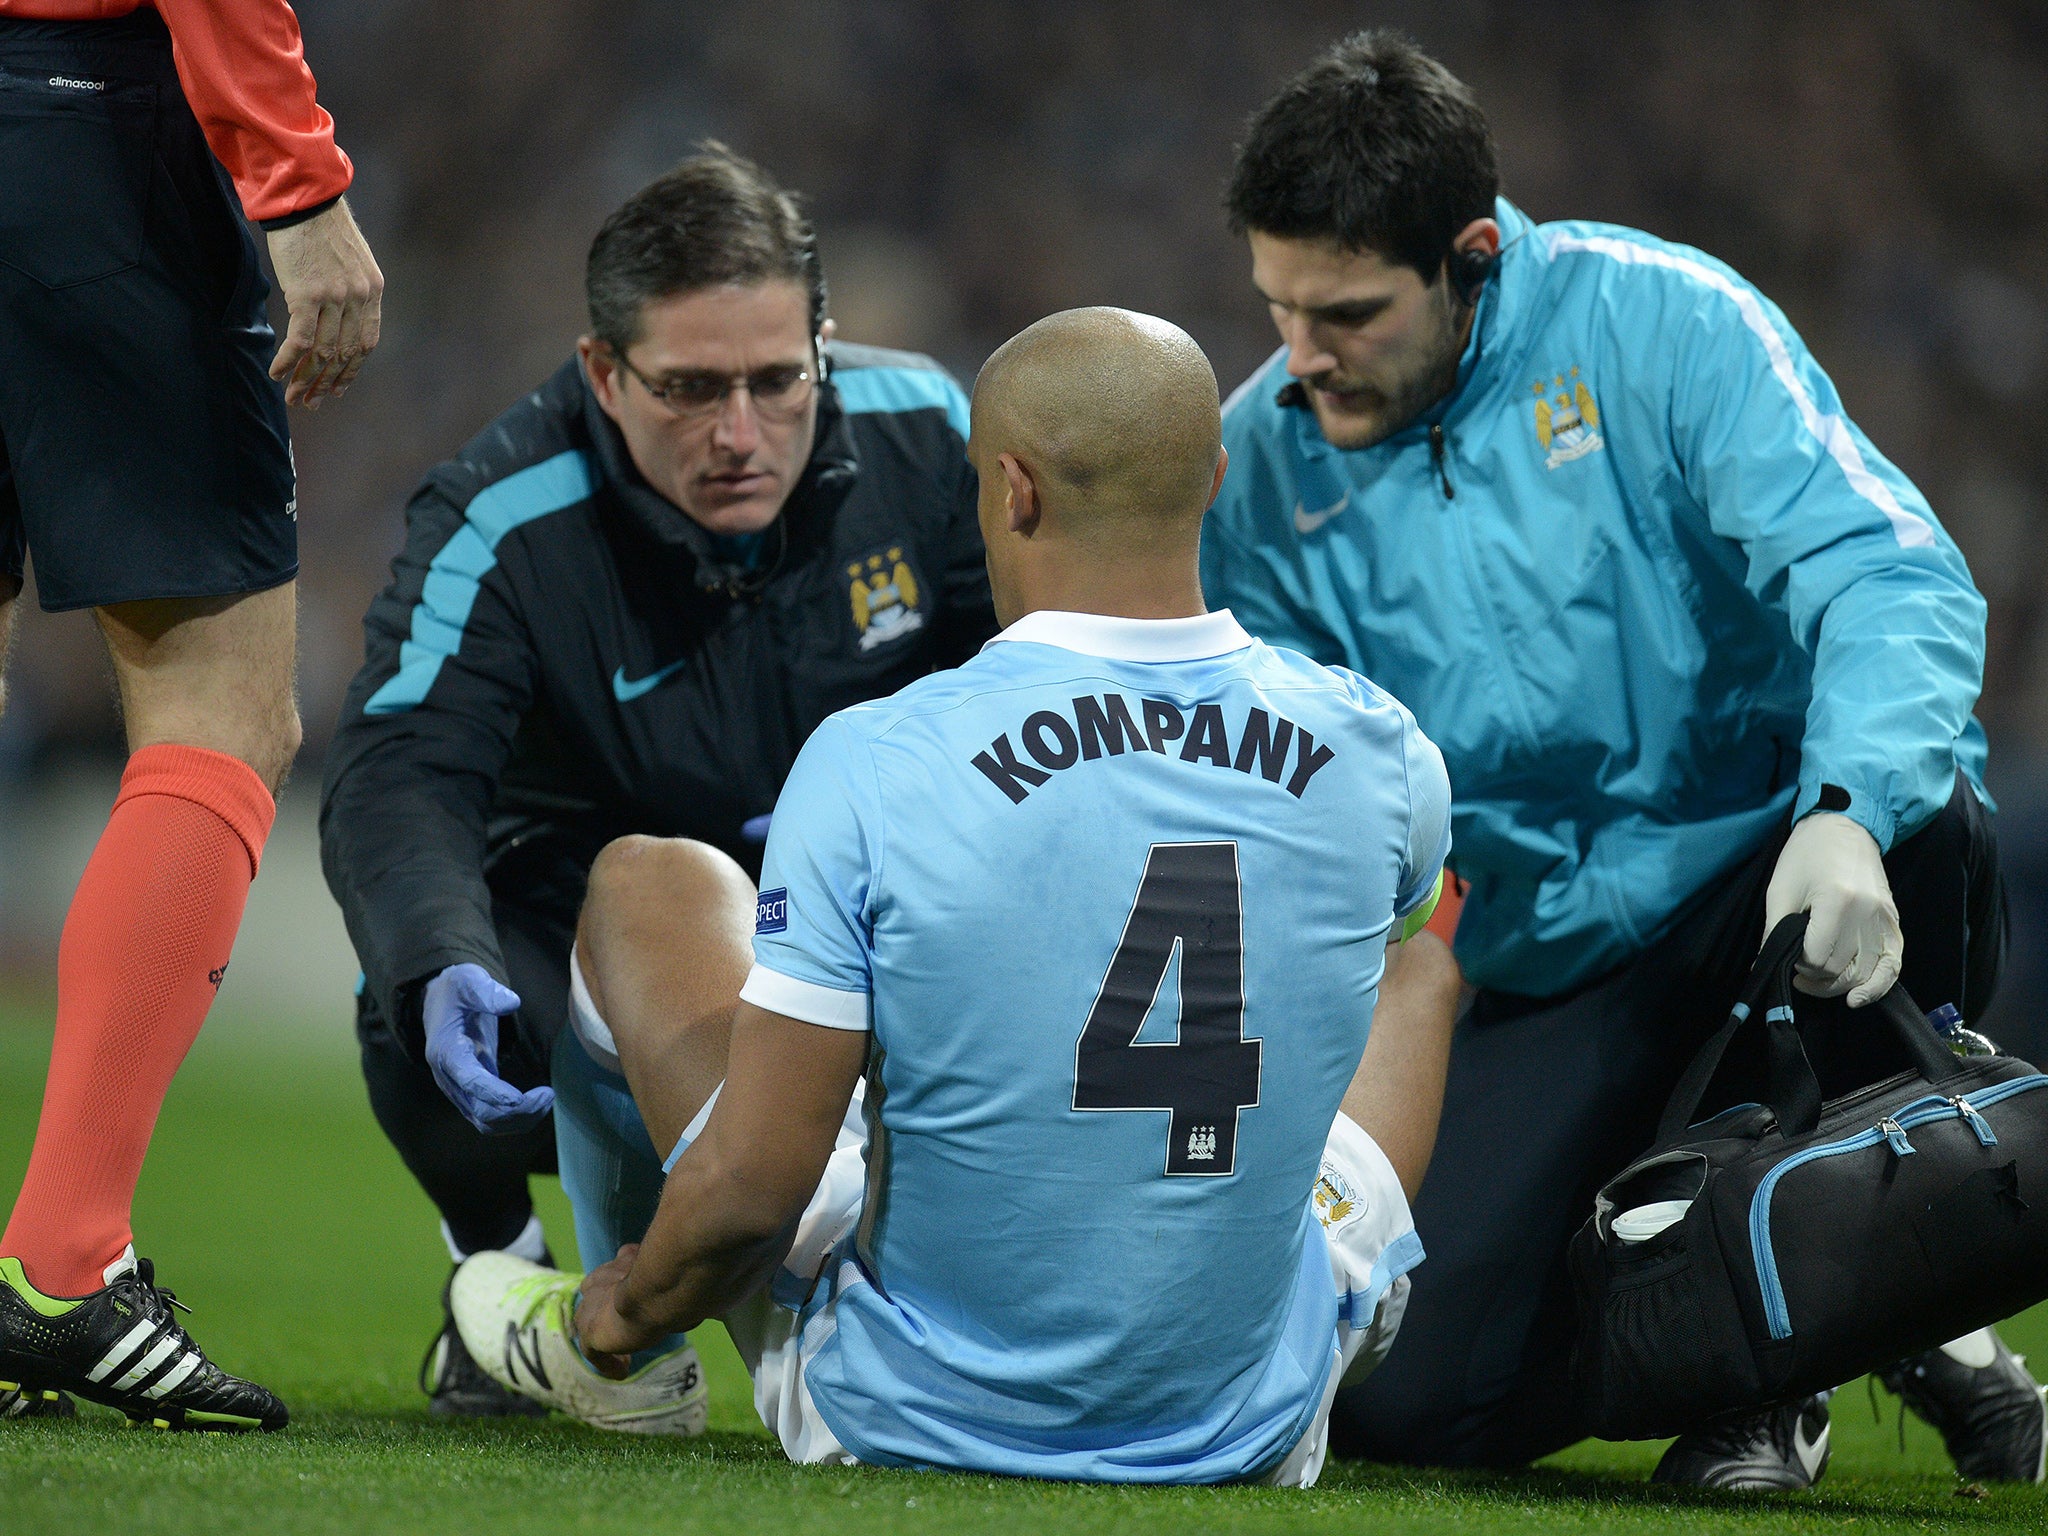 Vincent Kompany receives medical attention before leaving the pitch